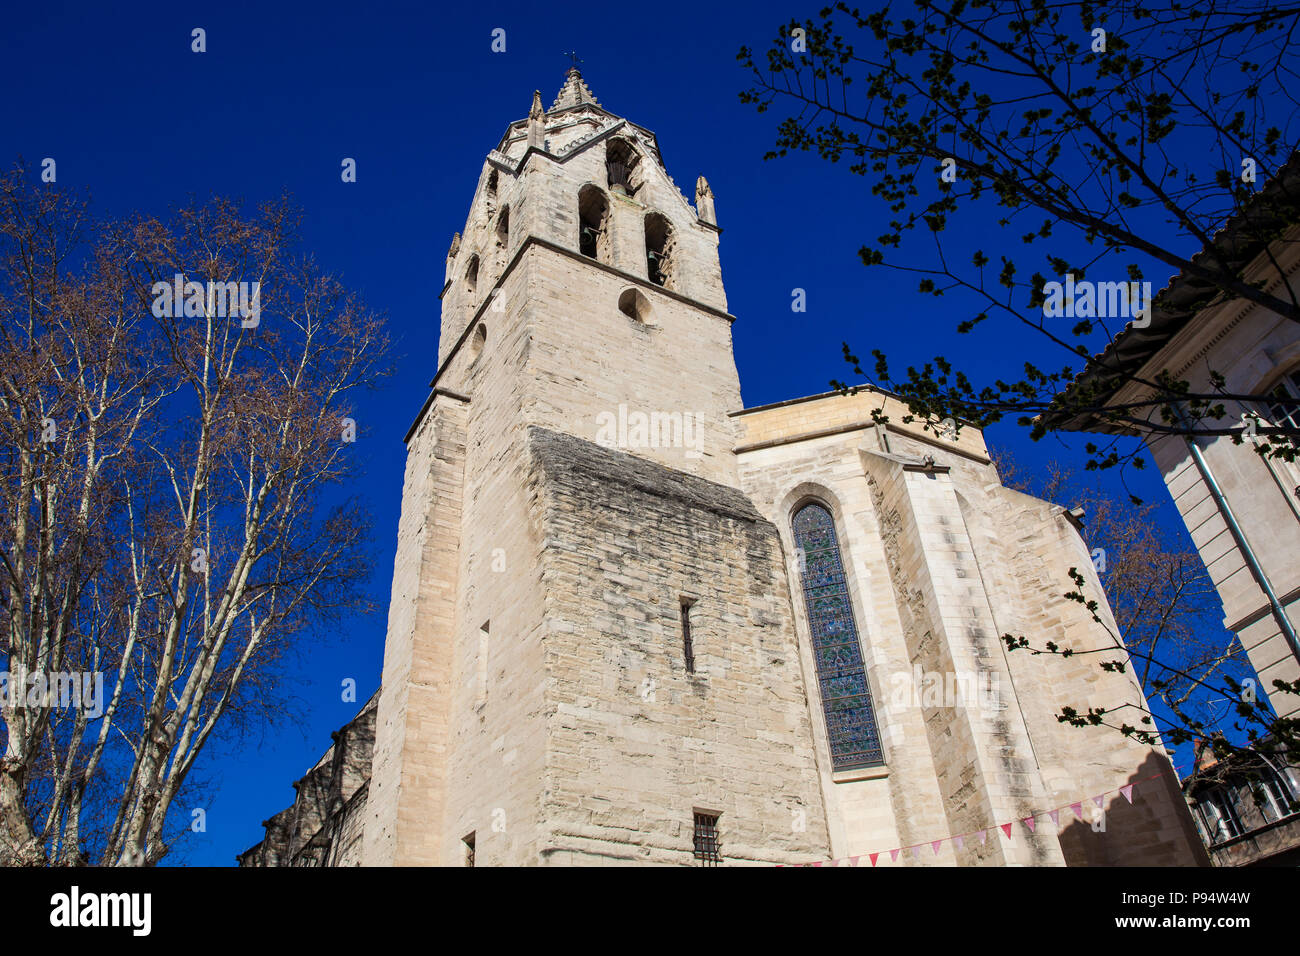 St Martial Temple at  the Agricol Perdiguier Square in Avignon France Stock Photo